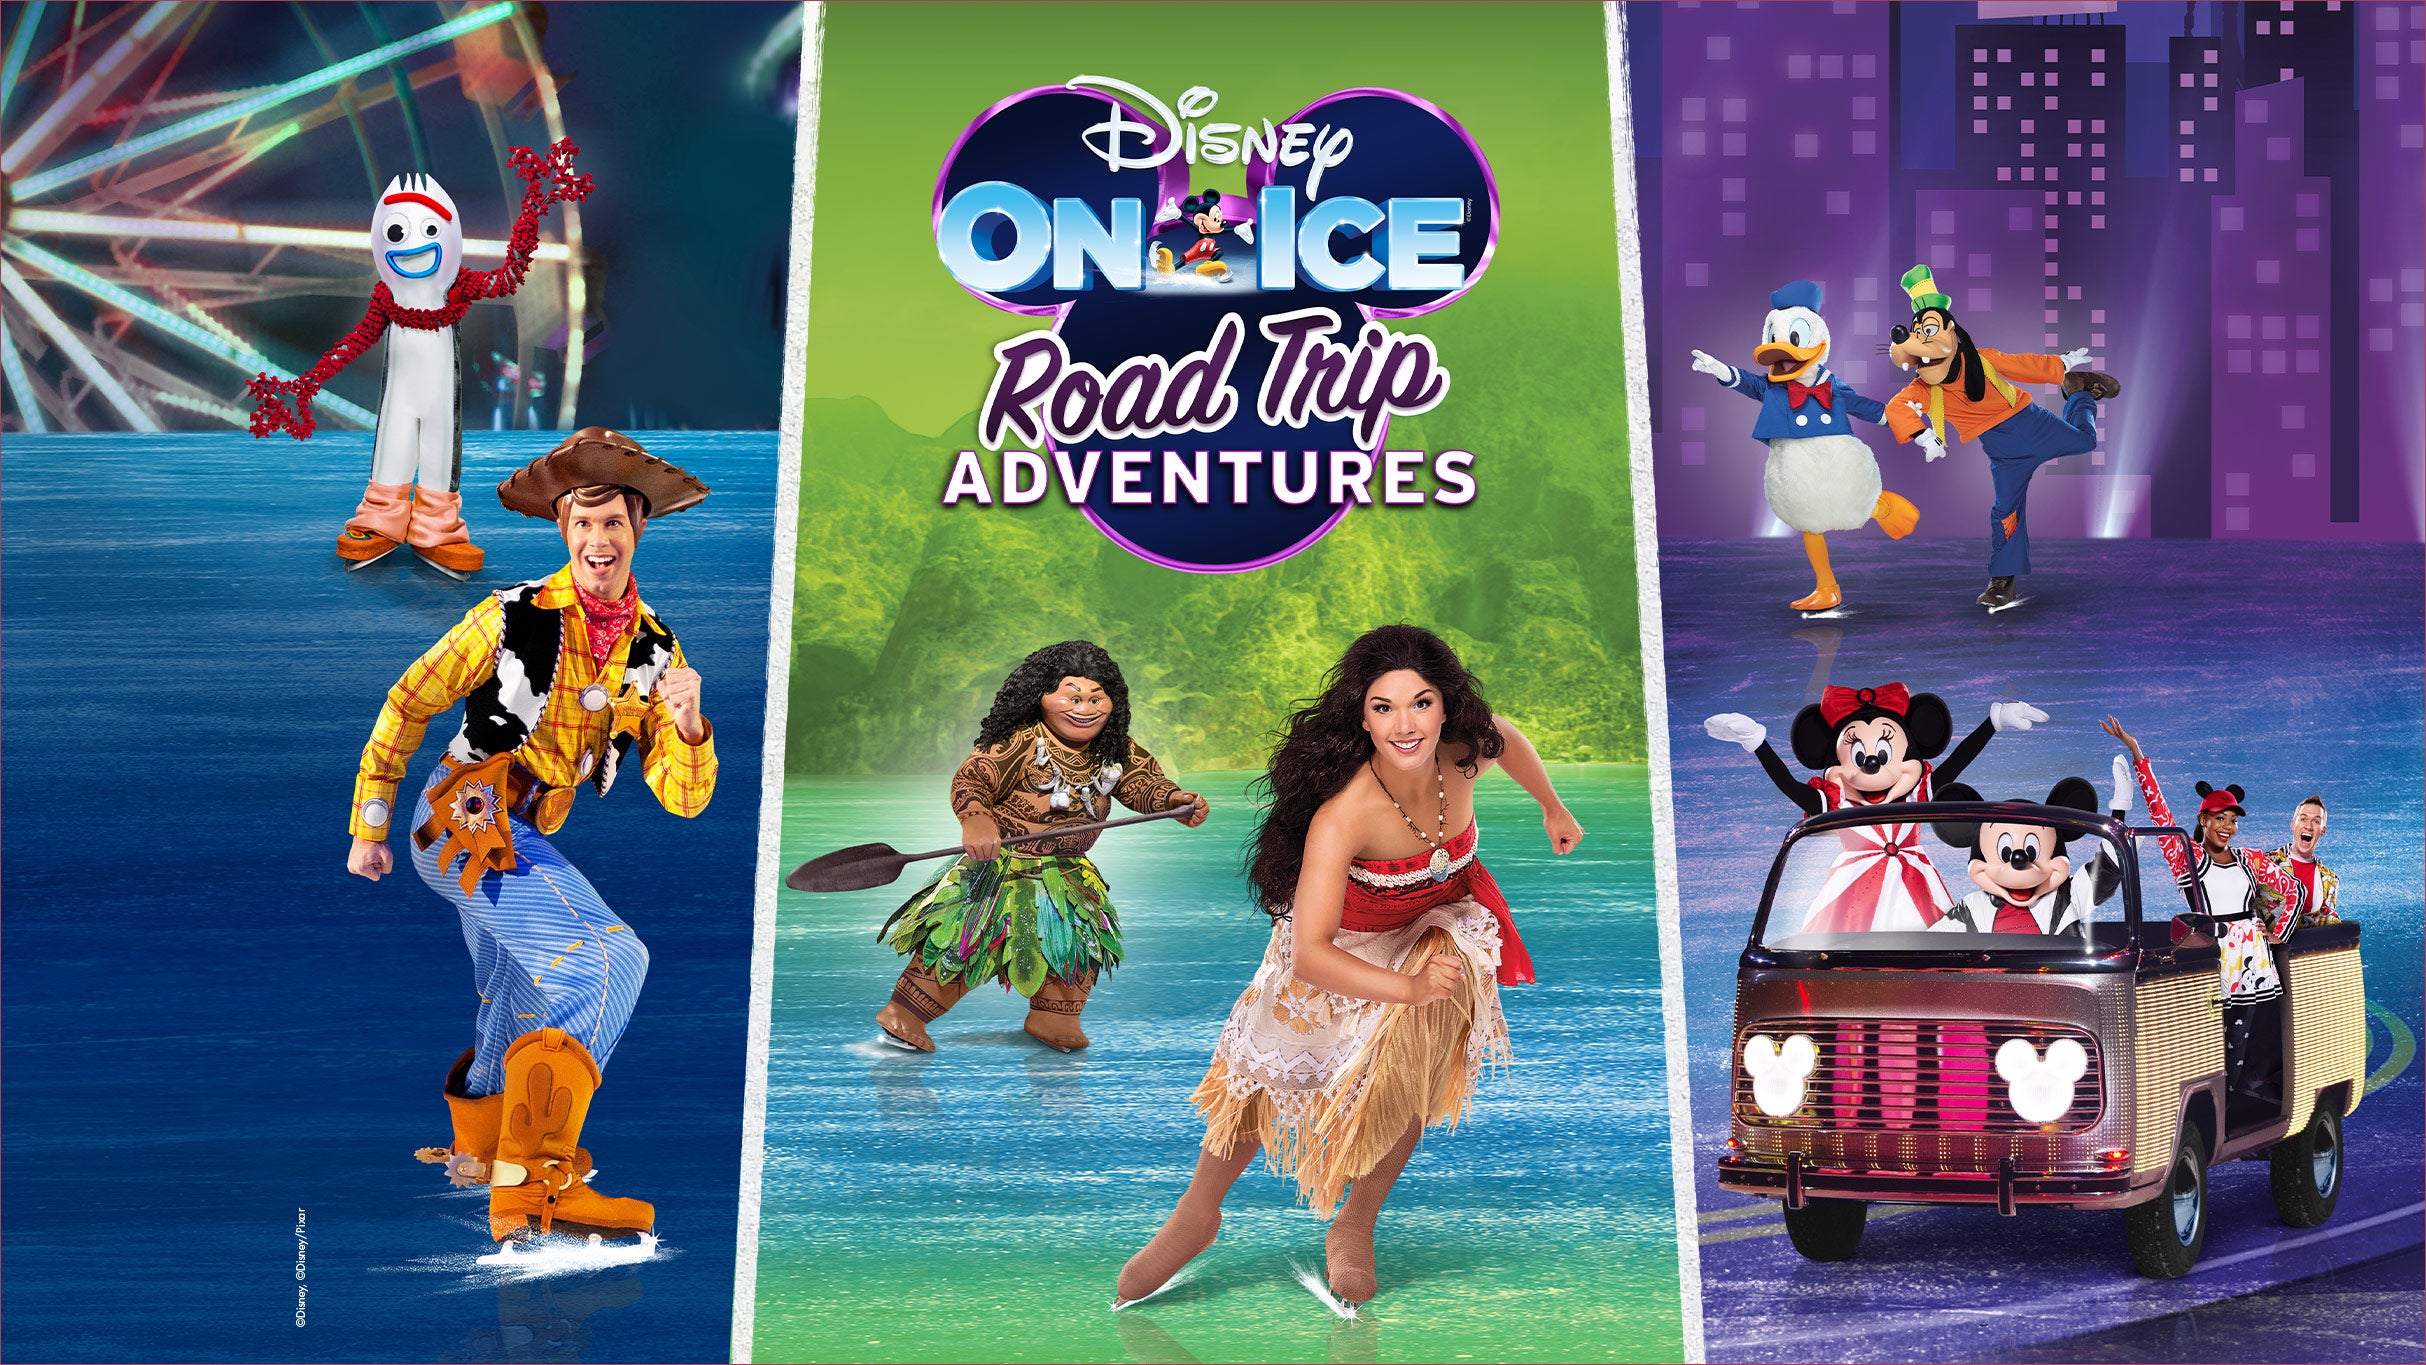 Disney On Ice presents Road Trip Adventures in Sheffield promo photo for Feld presale offer code